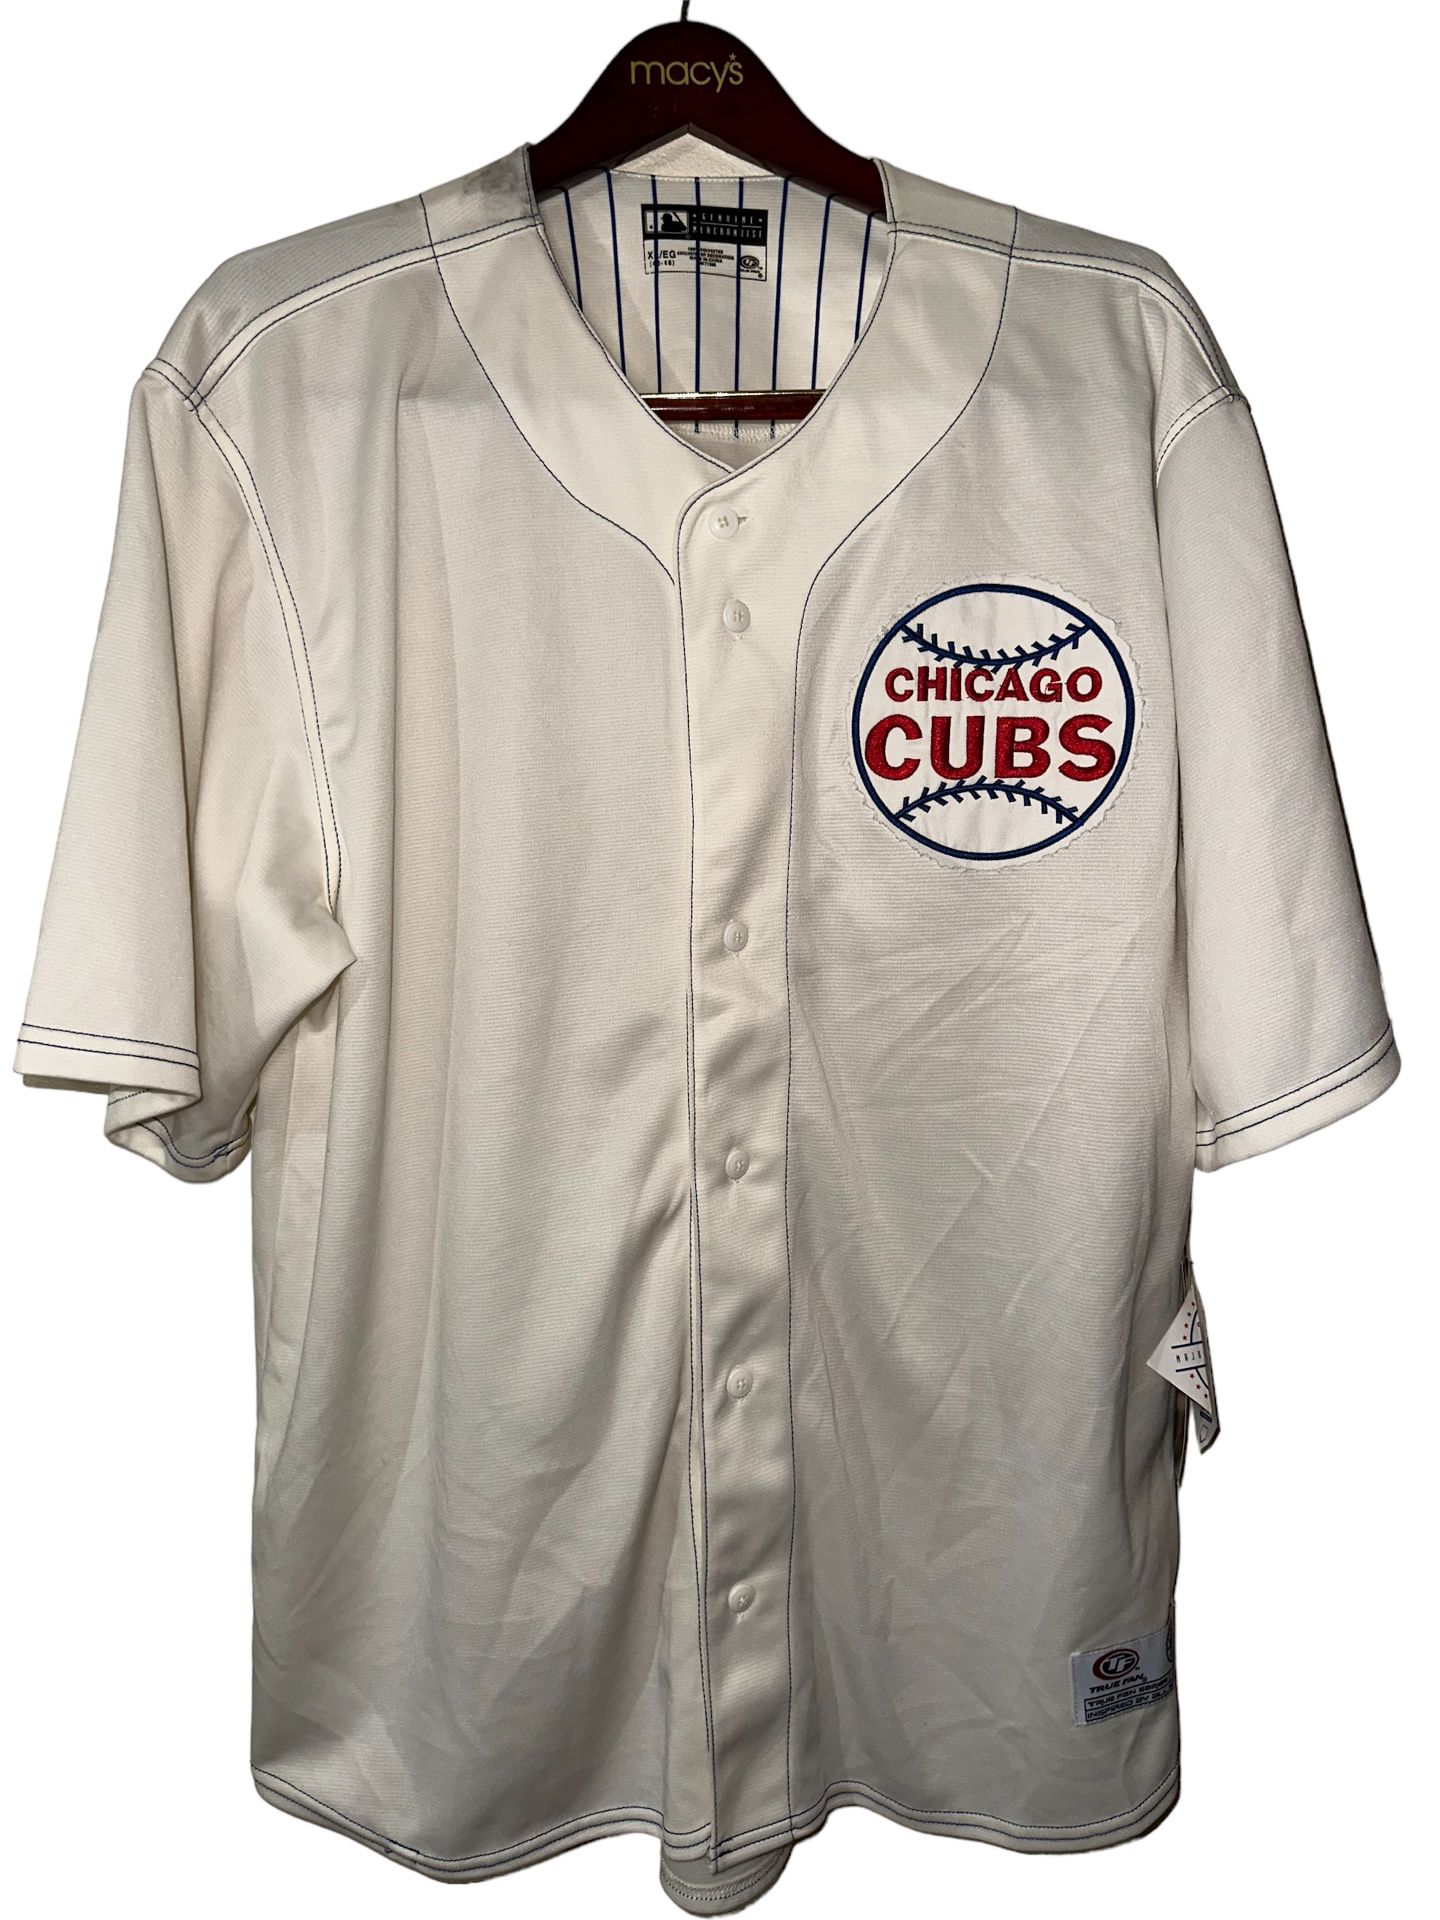 Vintage True Fan MLB Chicago Cubs Button Down Baseball Jersey